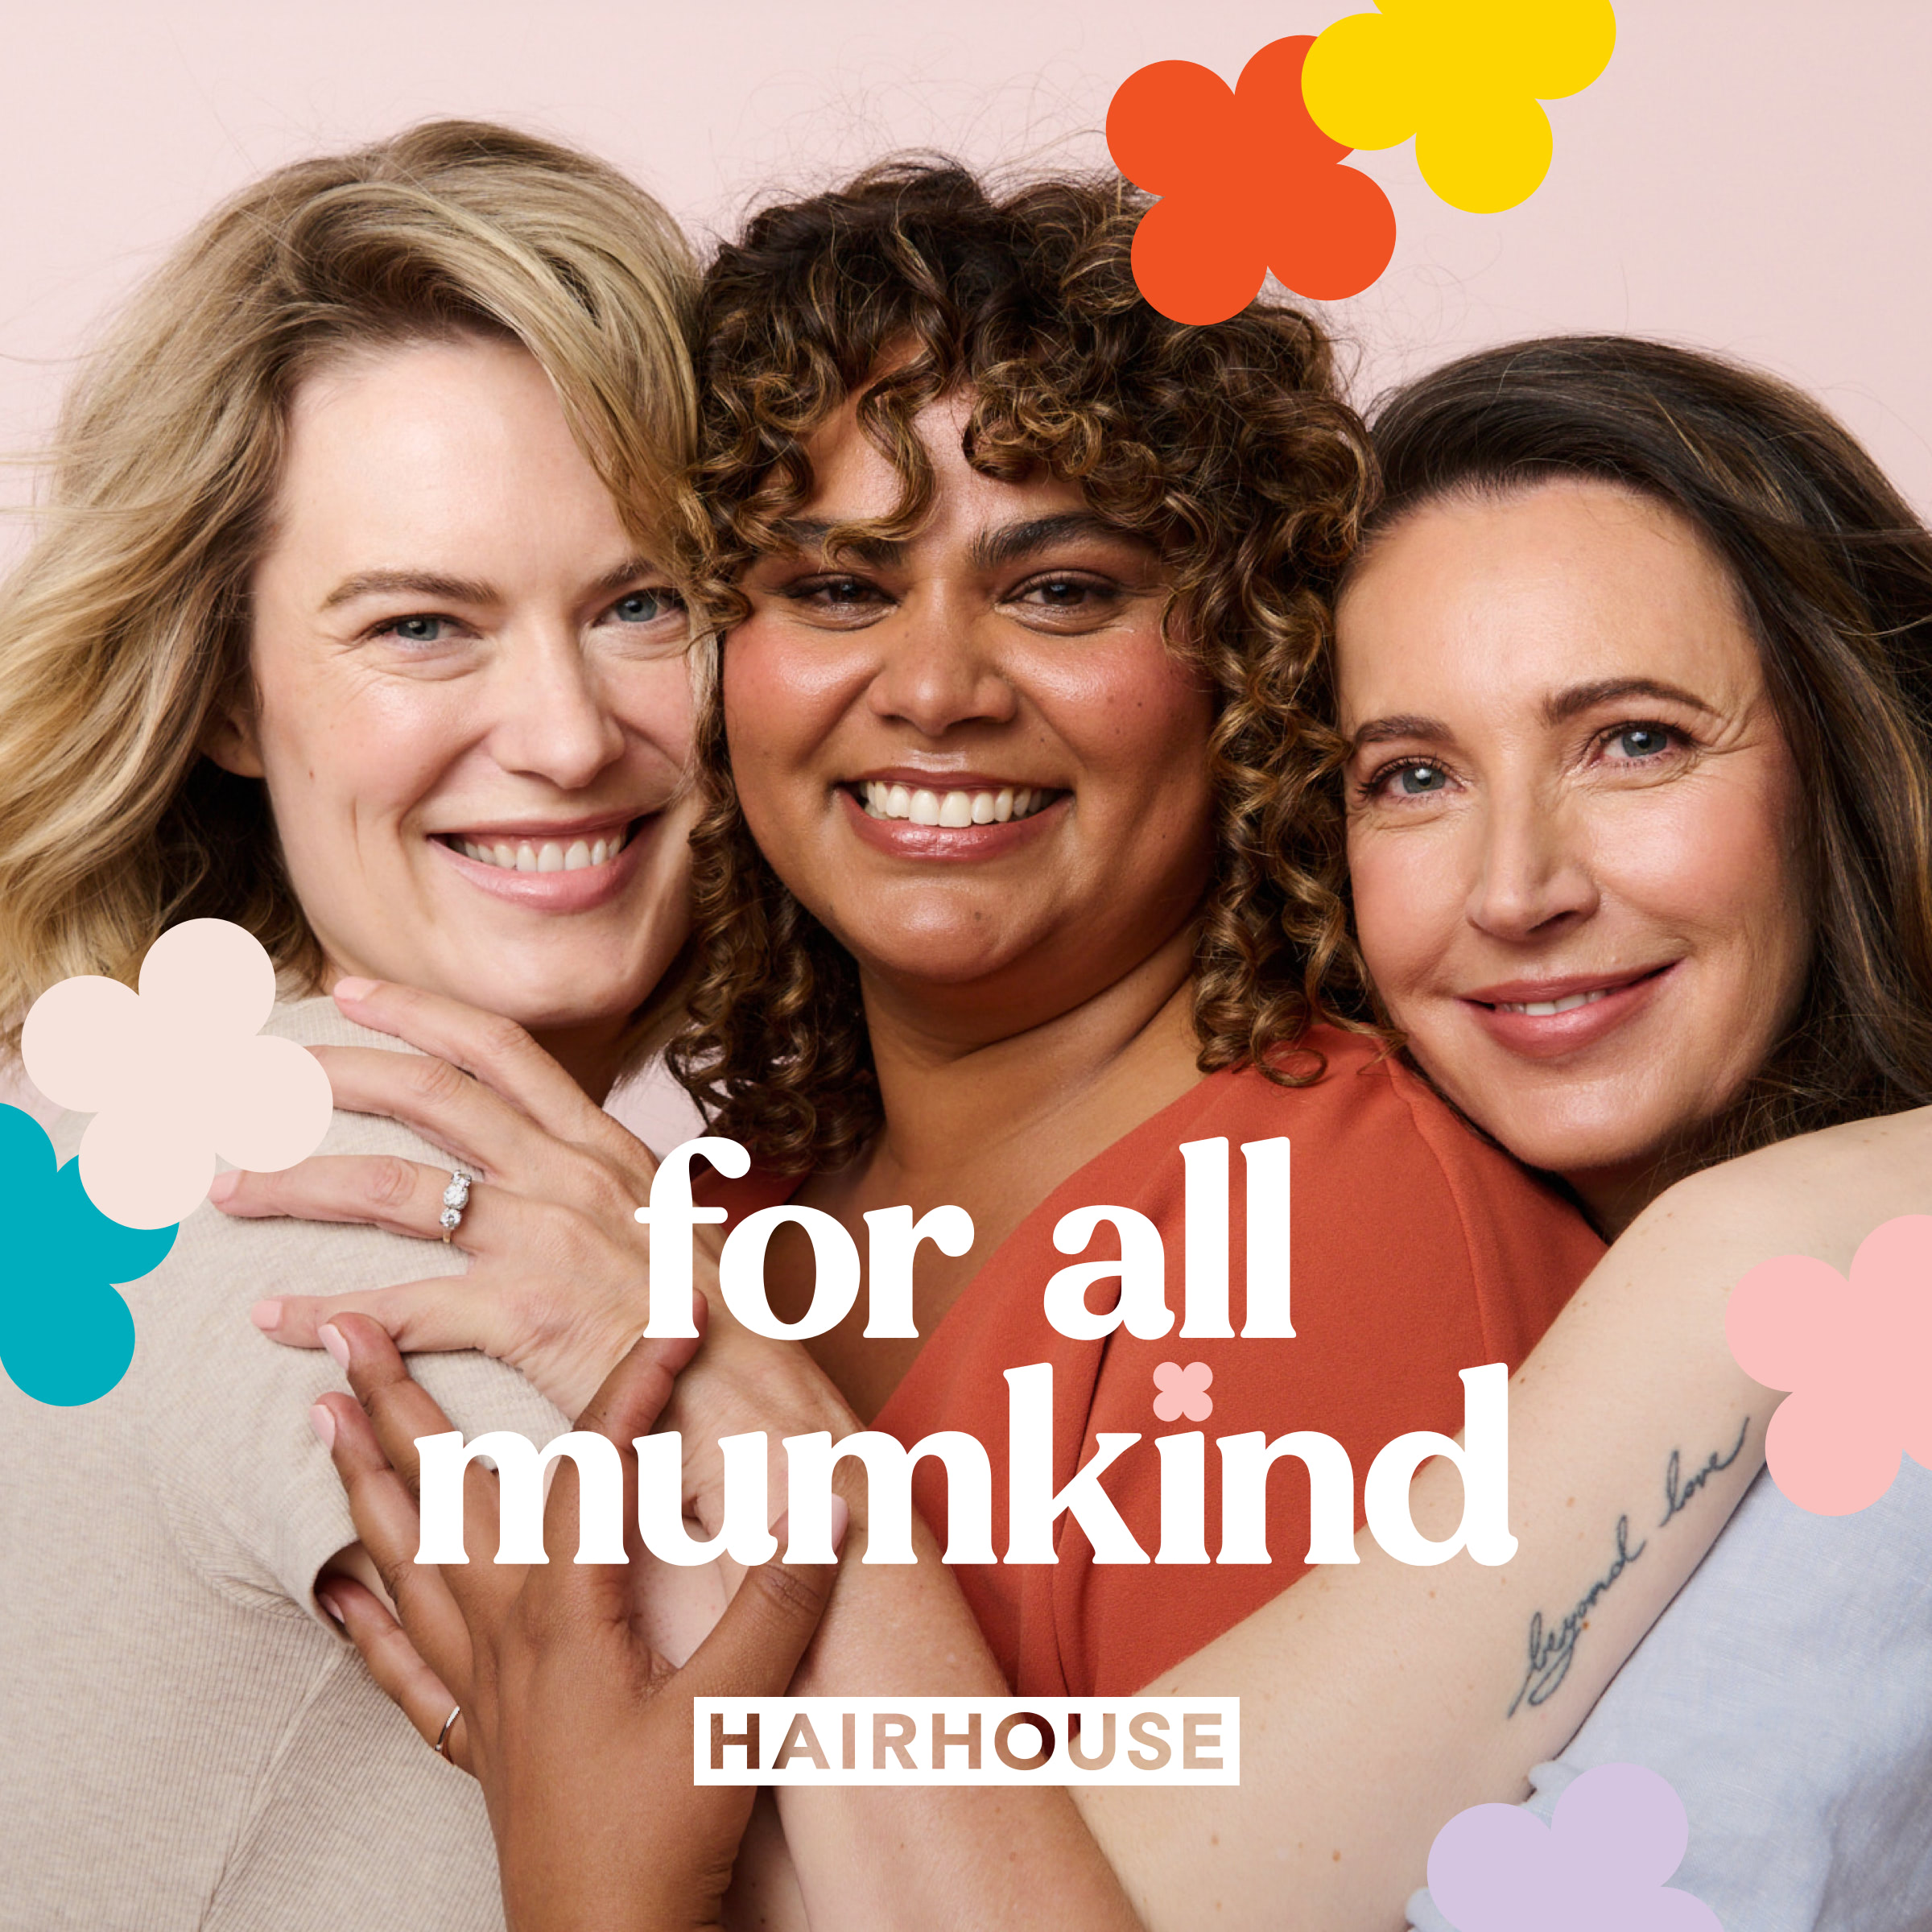 Celebrate for all mumkind at Hairhouse this Mother’s Day.